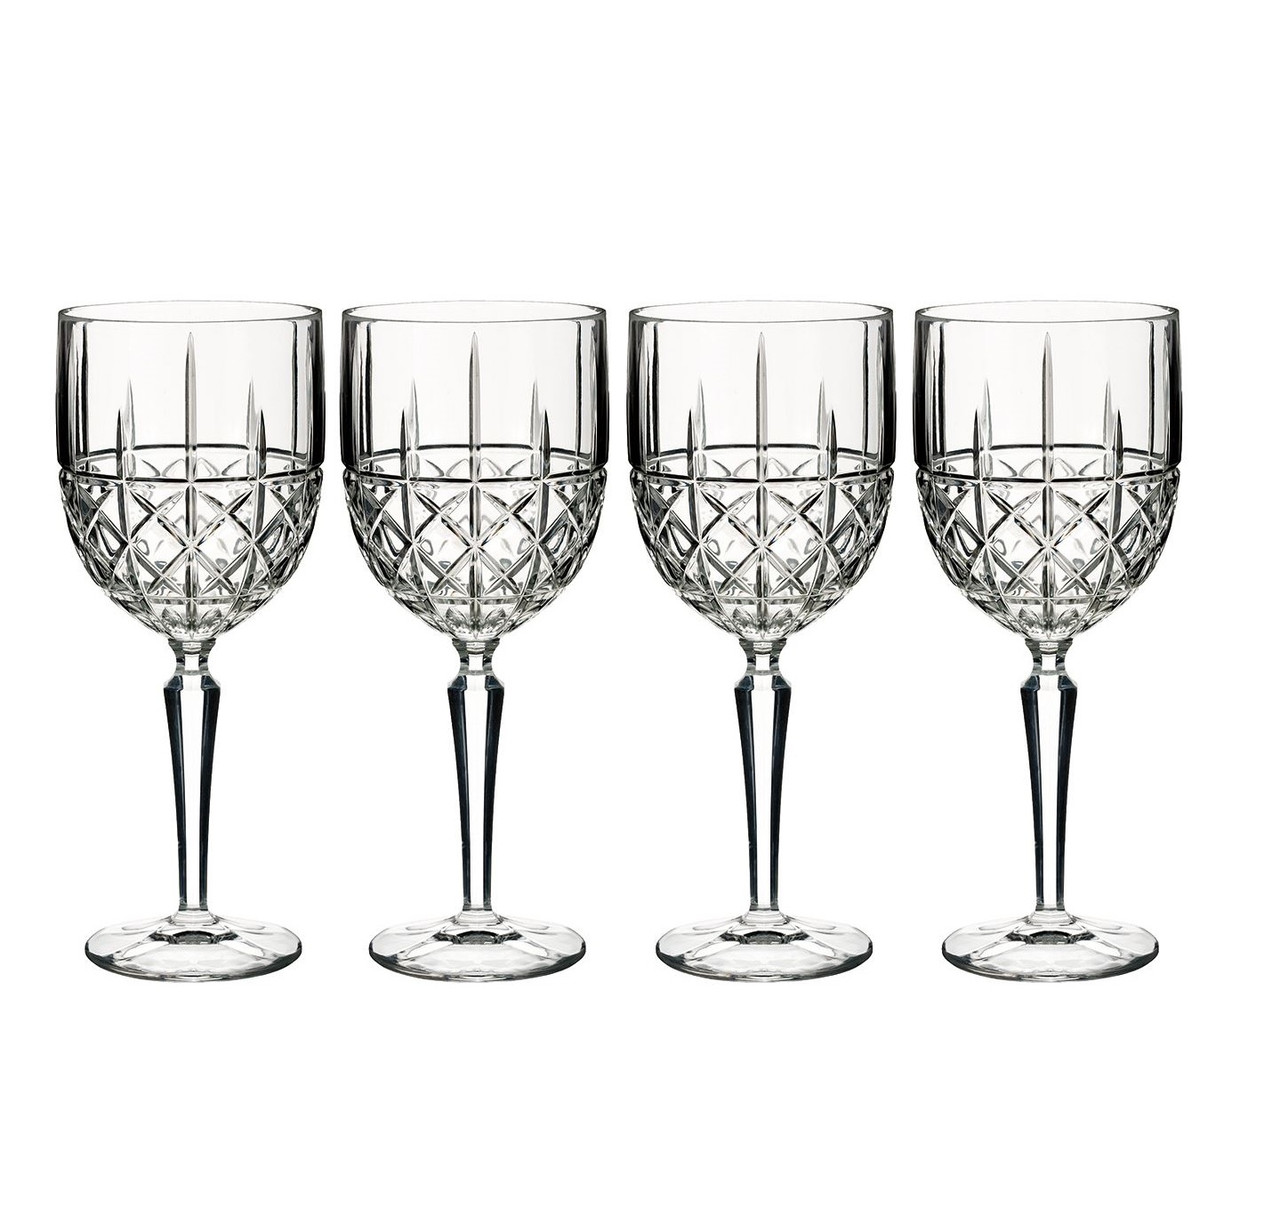 https://cdn11.bigcommerce.com/s-9mnzpxwffi/images/stencil/1280x1280/products/405/2264/Crystal_Stem_Wine_Glasses_Waterford_Brady_Collection__37775.1642646076.jpg?c=2